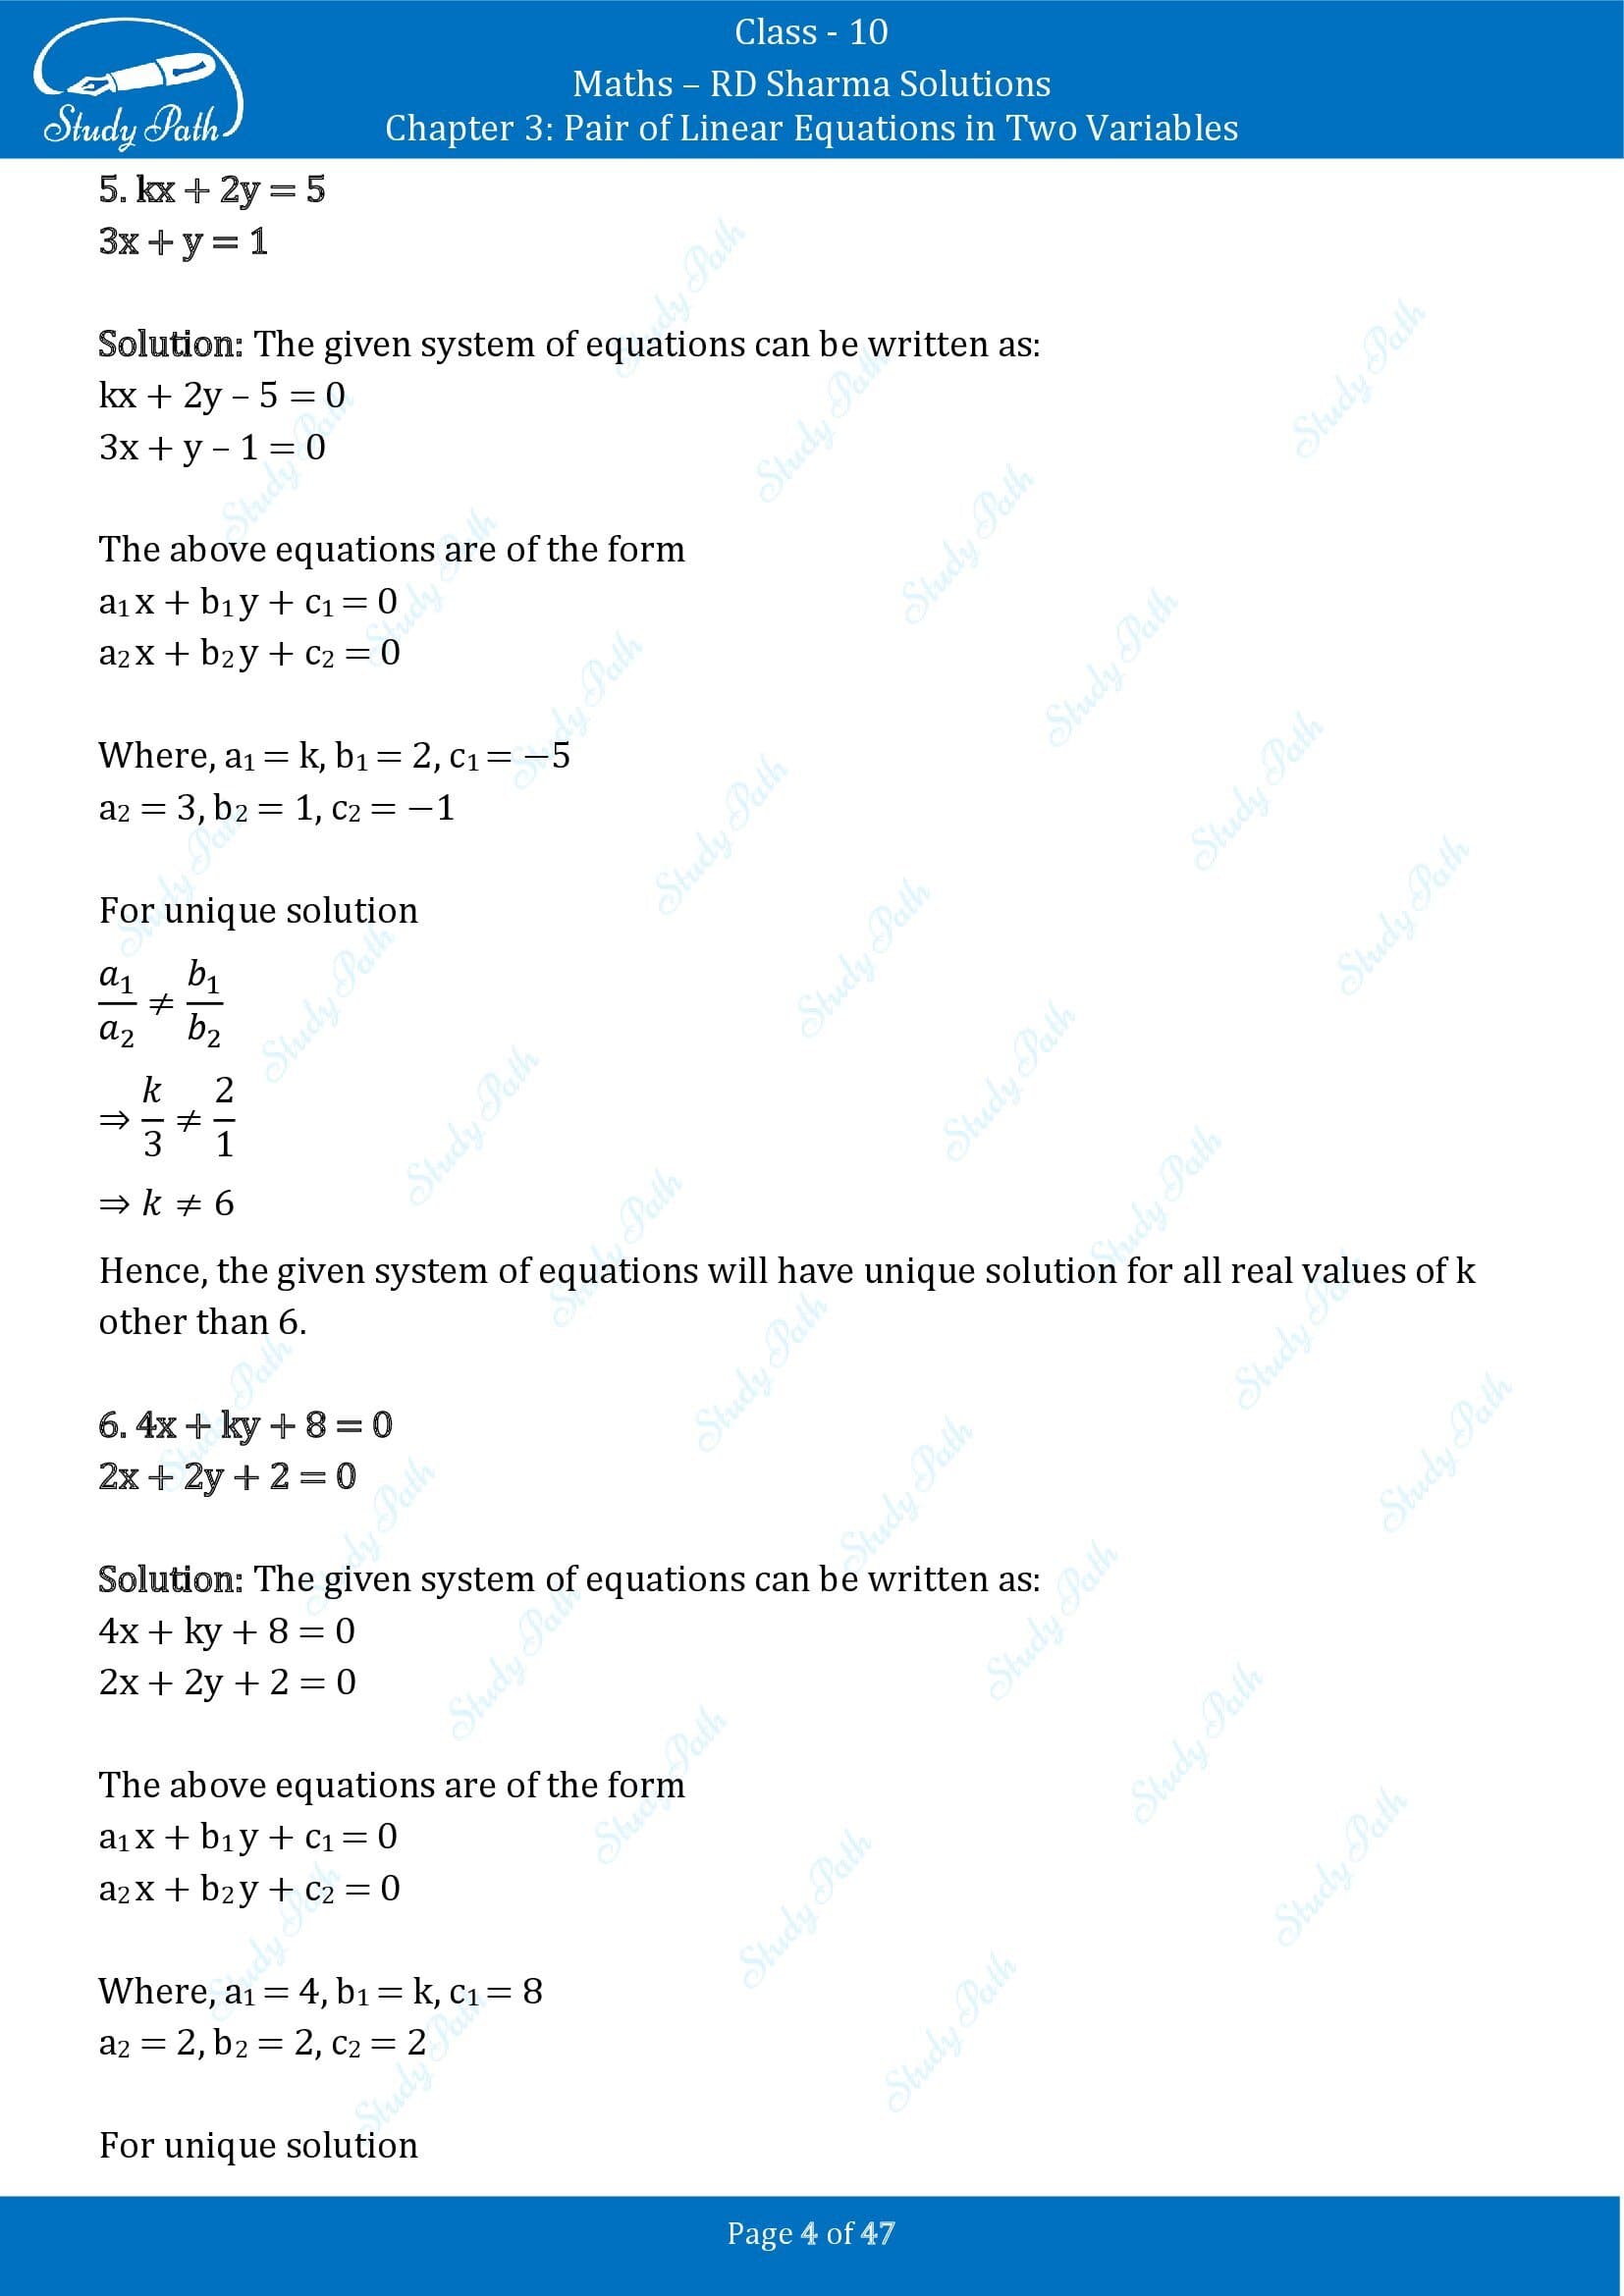 RD Sharma Solutions Class 10 Chapter 3 Pair of Linear Equations in Two Variables Exercise 3.5 00004